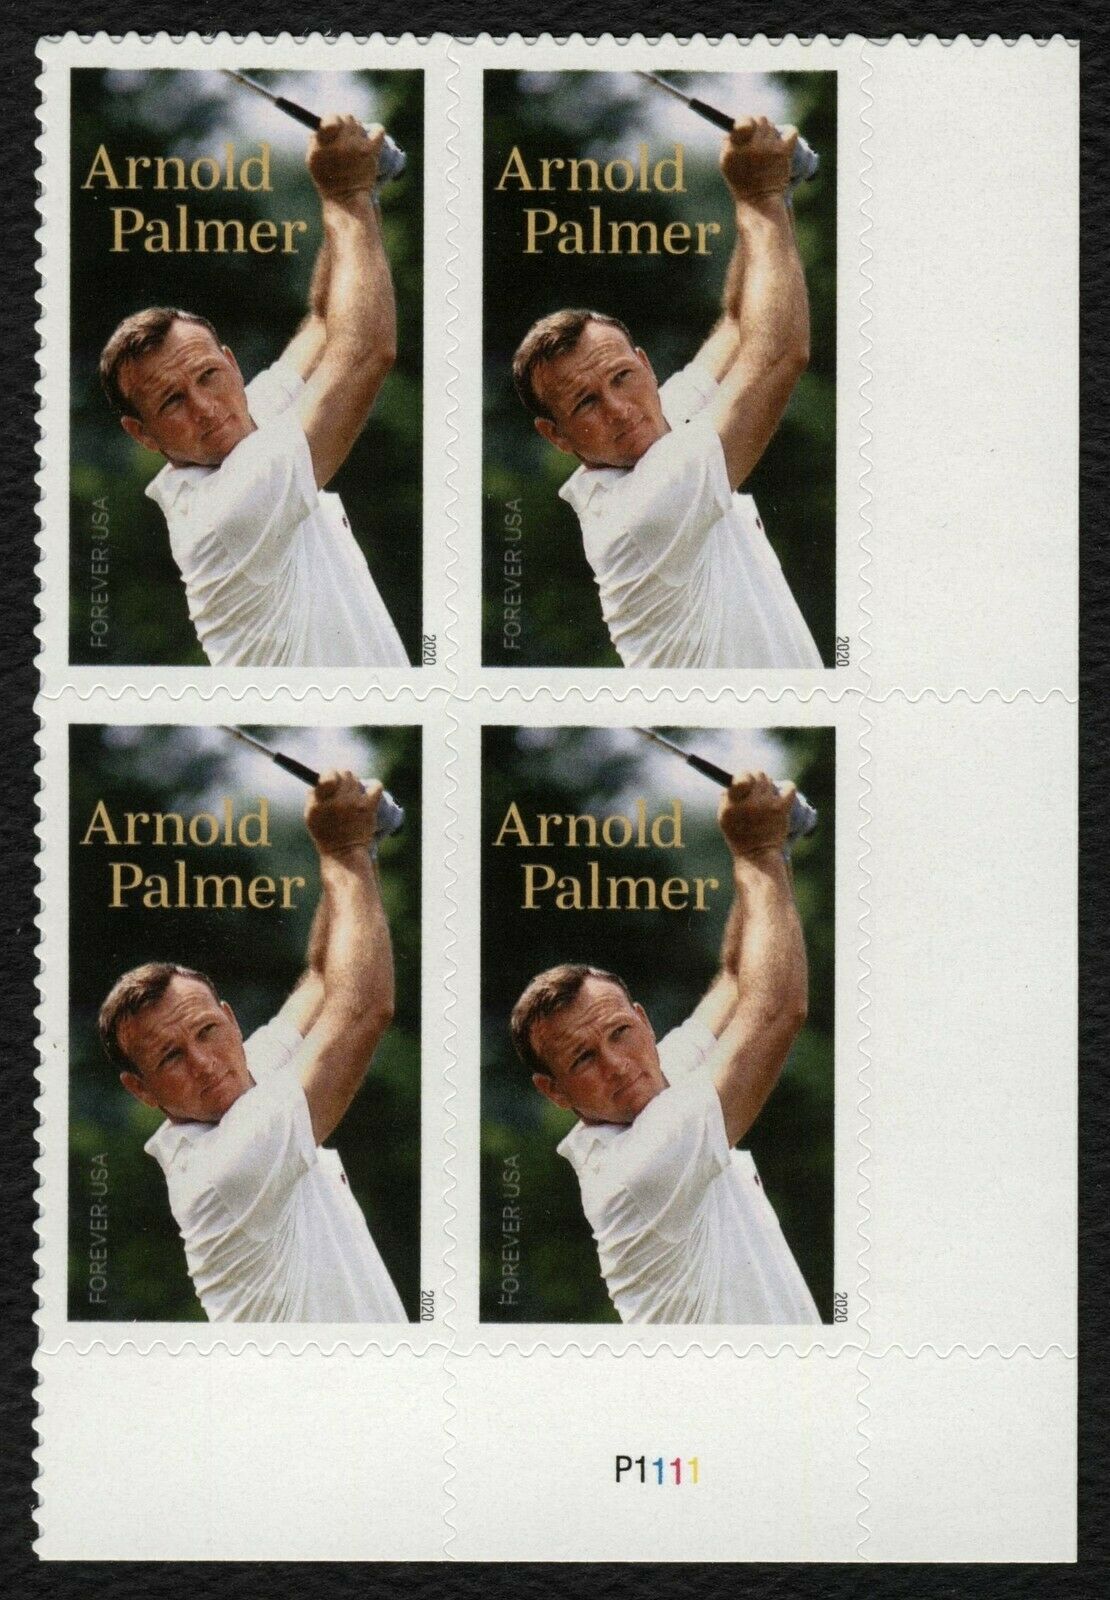 5455 Forever Arnold Palmer Mint Plate Block of 4 #5455pb